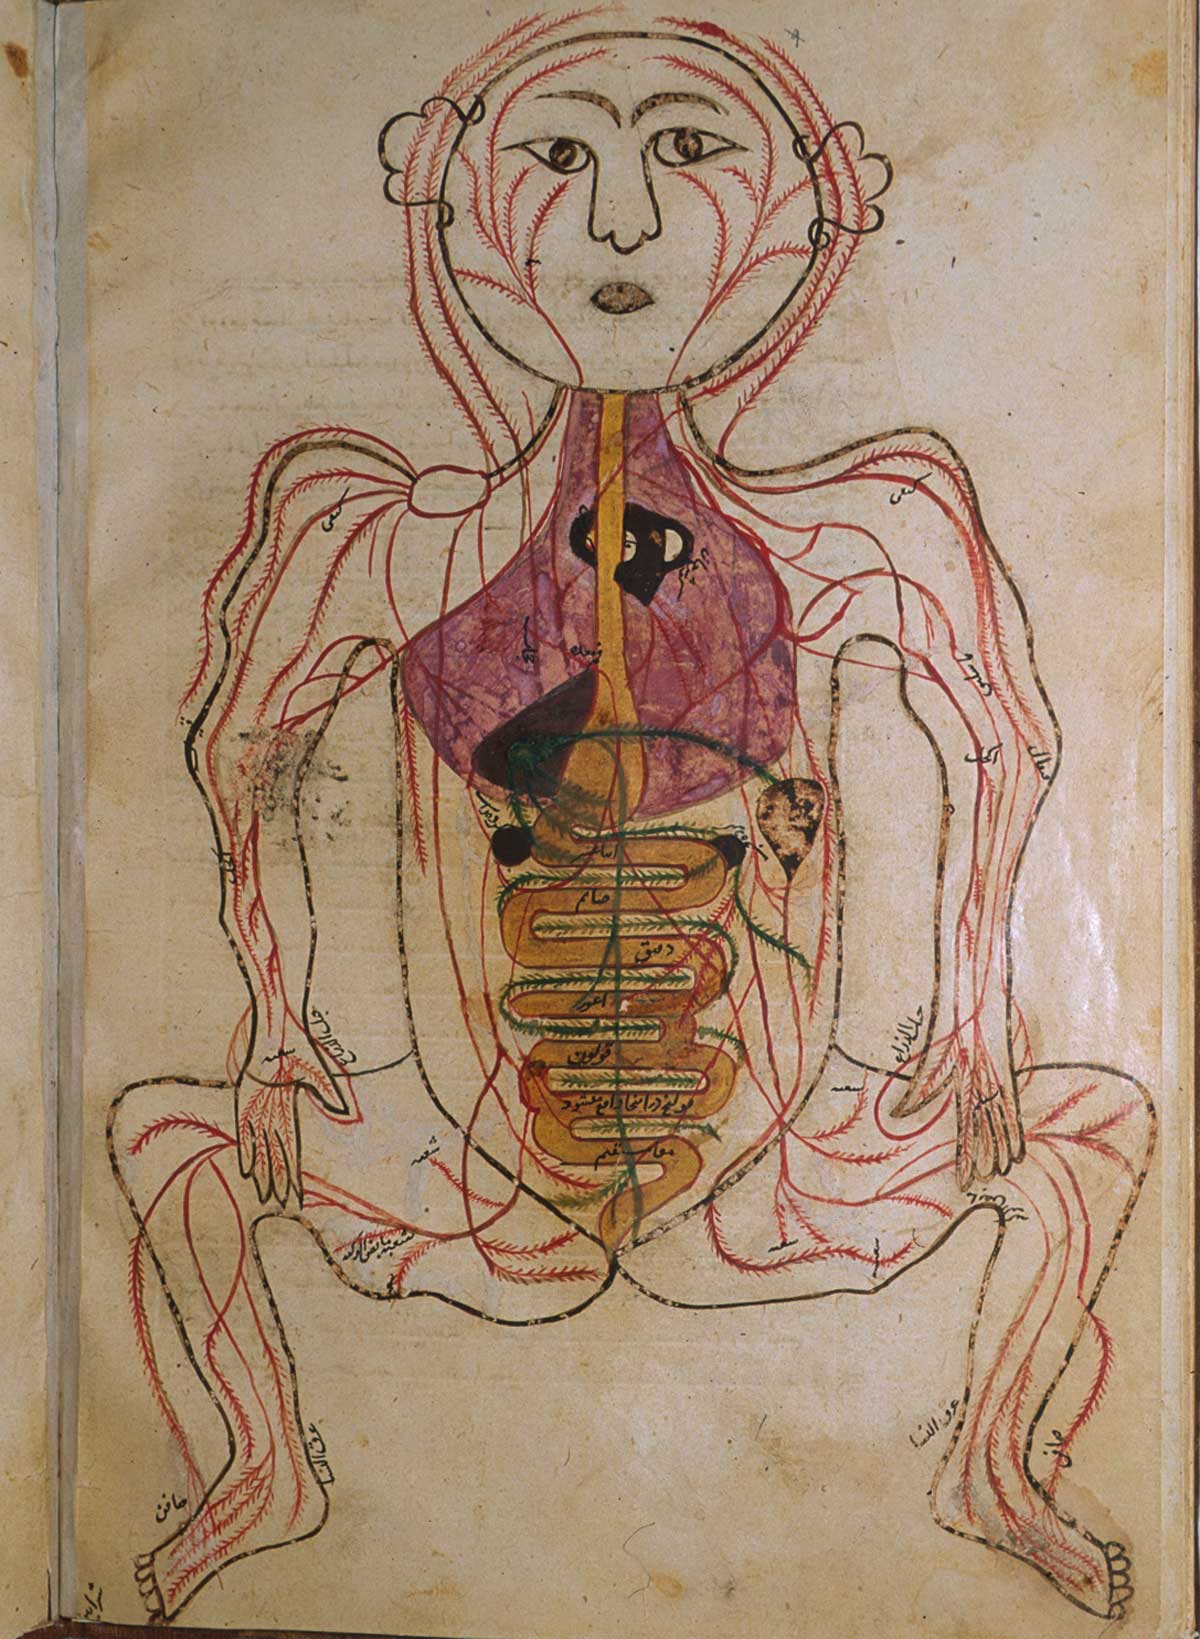 Folio 16b of Mansur ibn Ilyas' Tashrih-i badan-i insan, featuring the venous system, with the figure drawn frontally and the internal organs indicated in opaque watercolors.